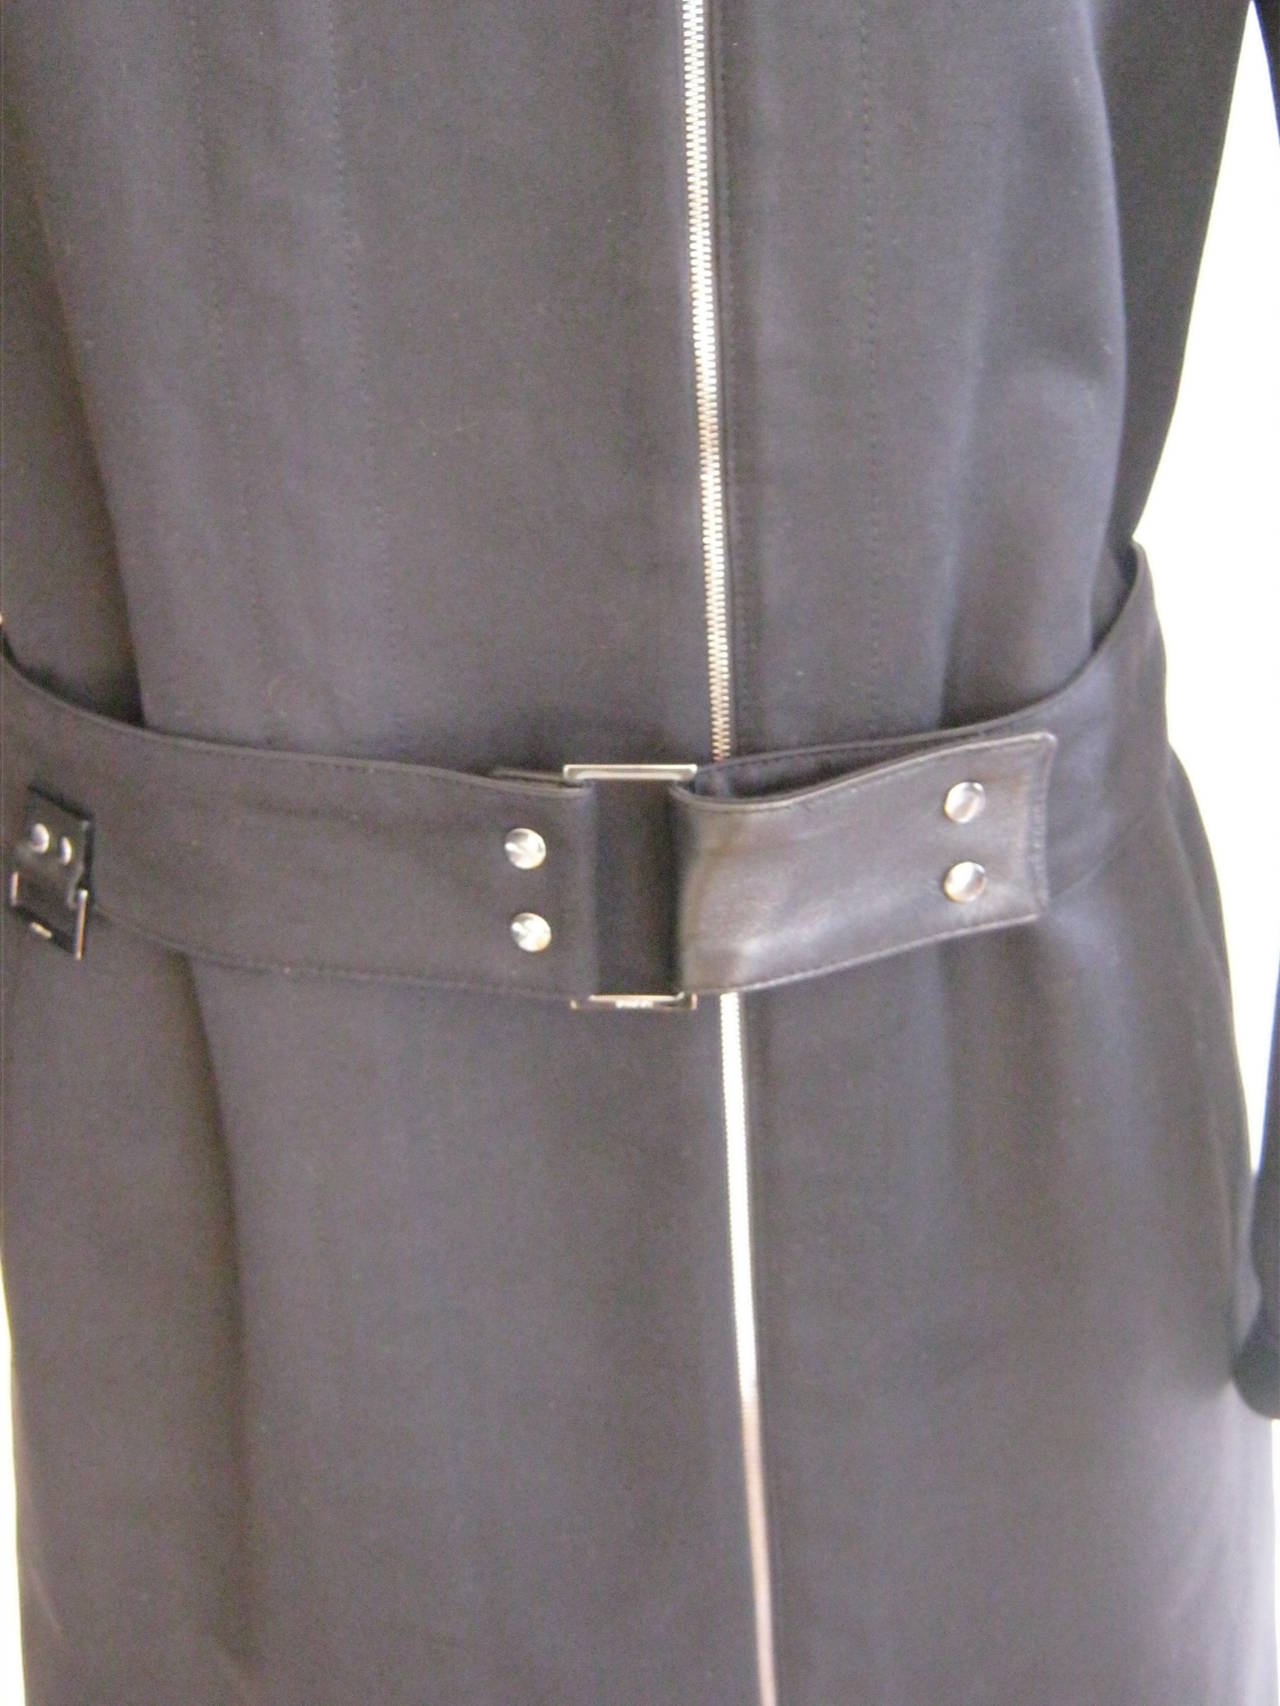 100% heavy cotton this trench coat has a number of unusual details such as a side zipper fastening; leather cuff trim and inside seams; adjustable snap belt with one side cotton and the other leather; two slant pockets;  snap silver detailing with